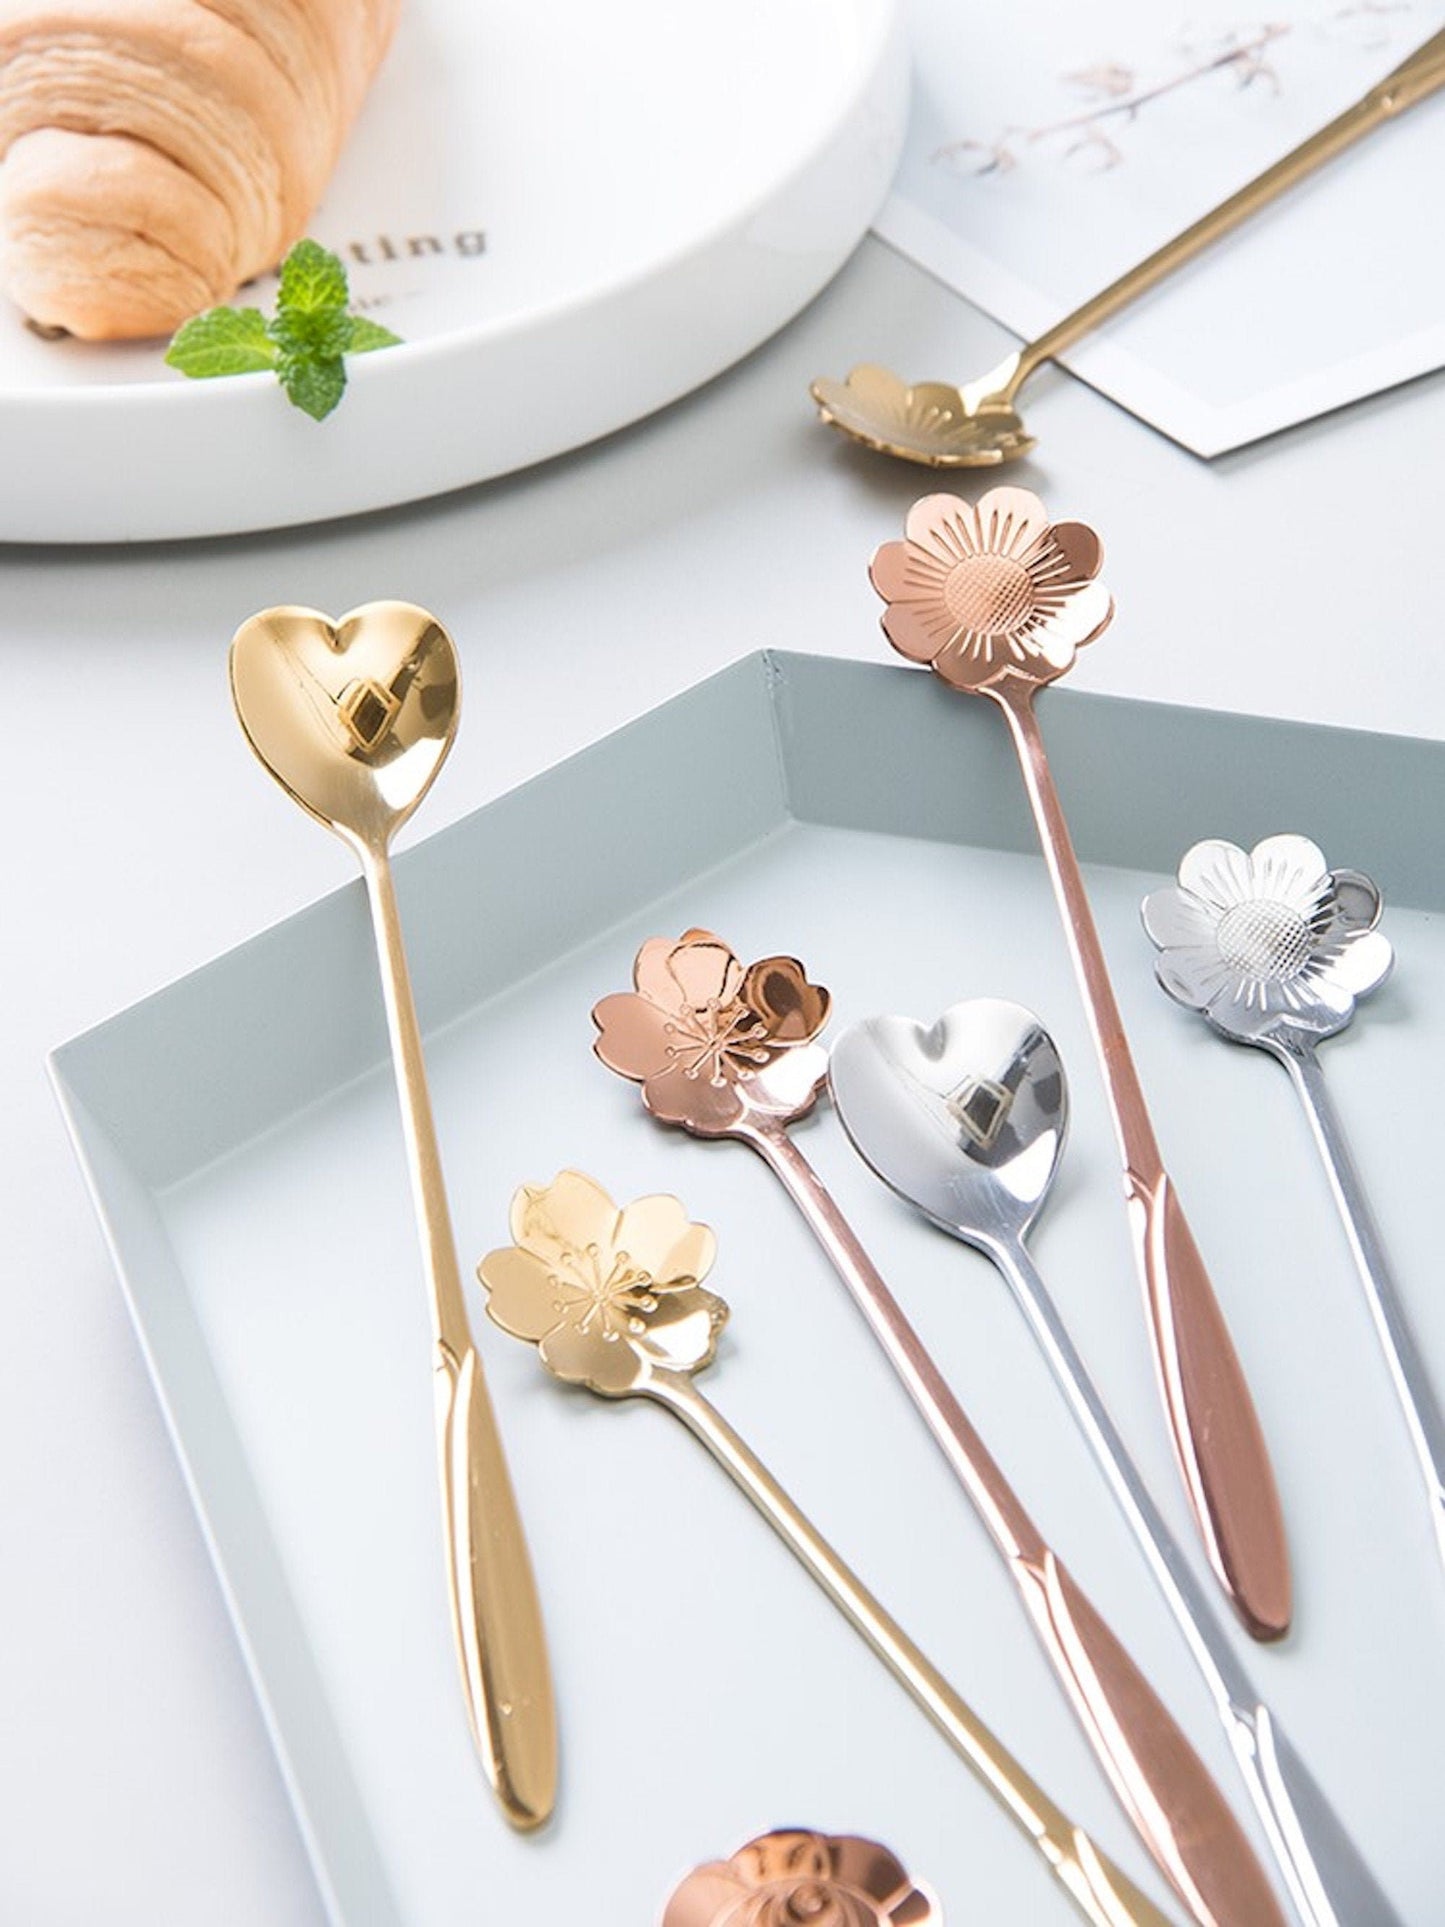 Set of 4 Luxury Stainless Steel Titanium Plated Gold or Rose Gold Coated Kitchen Cutlery Flatware Spoon for Coffee Desserts Appetizers  22.99 Indigo Paisley